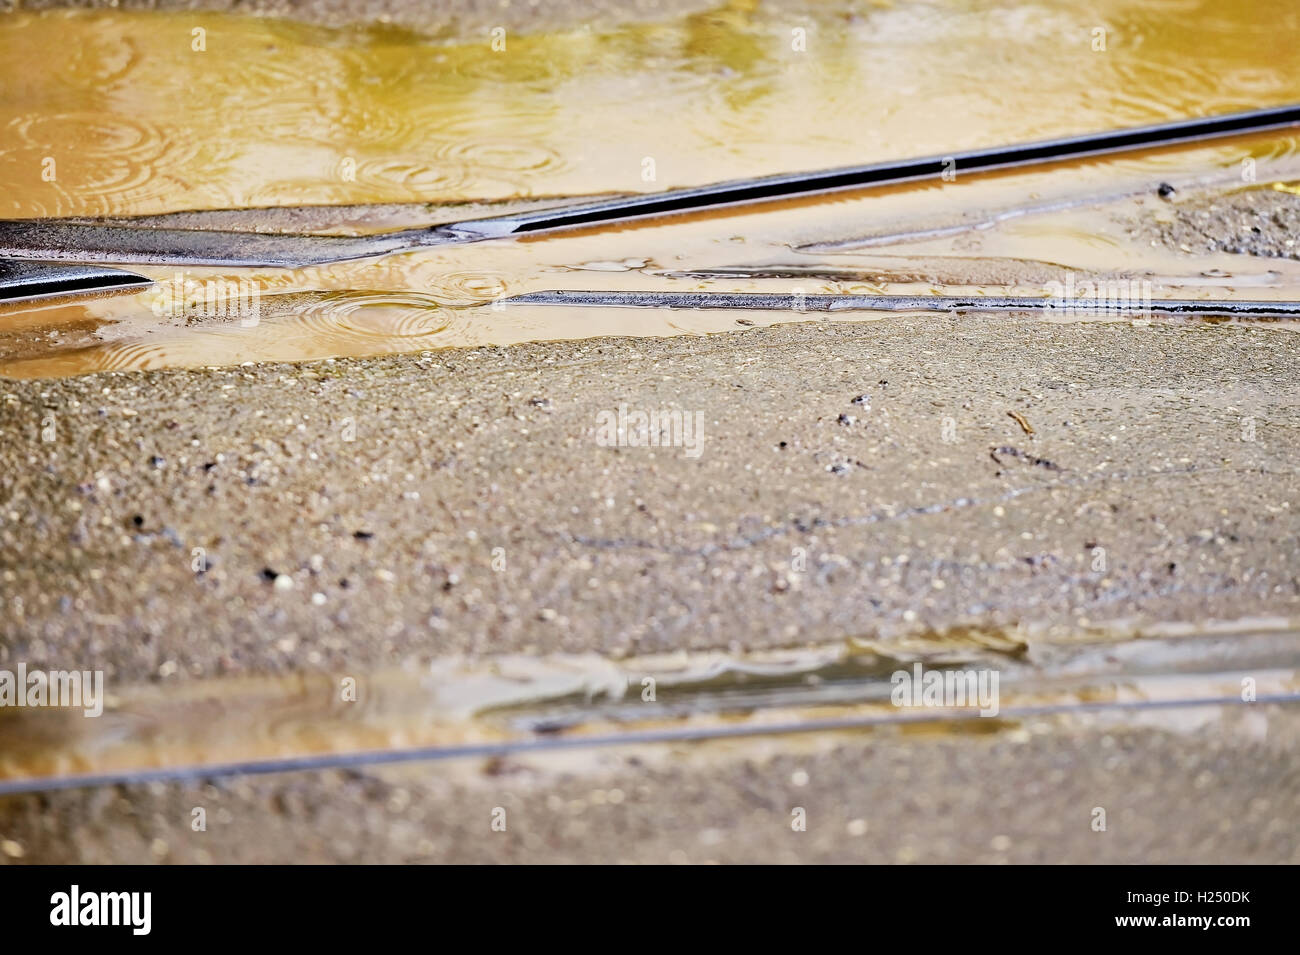 Detail shot with tramway track during rainfall Stock Photo